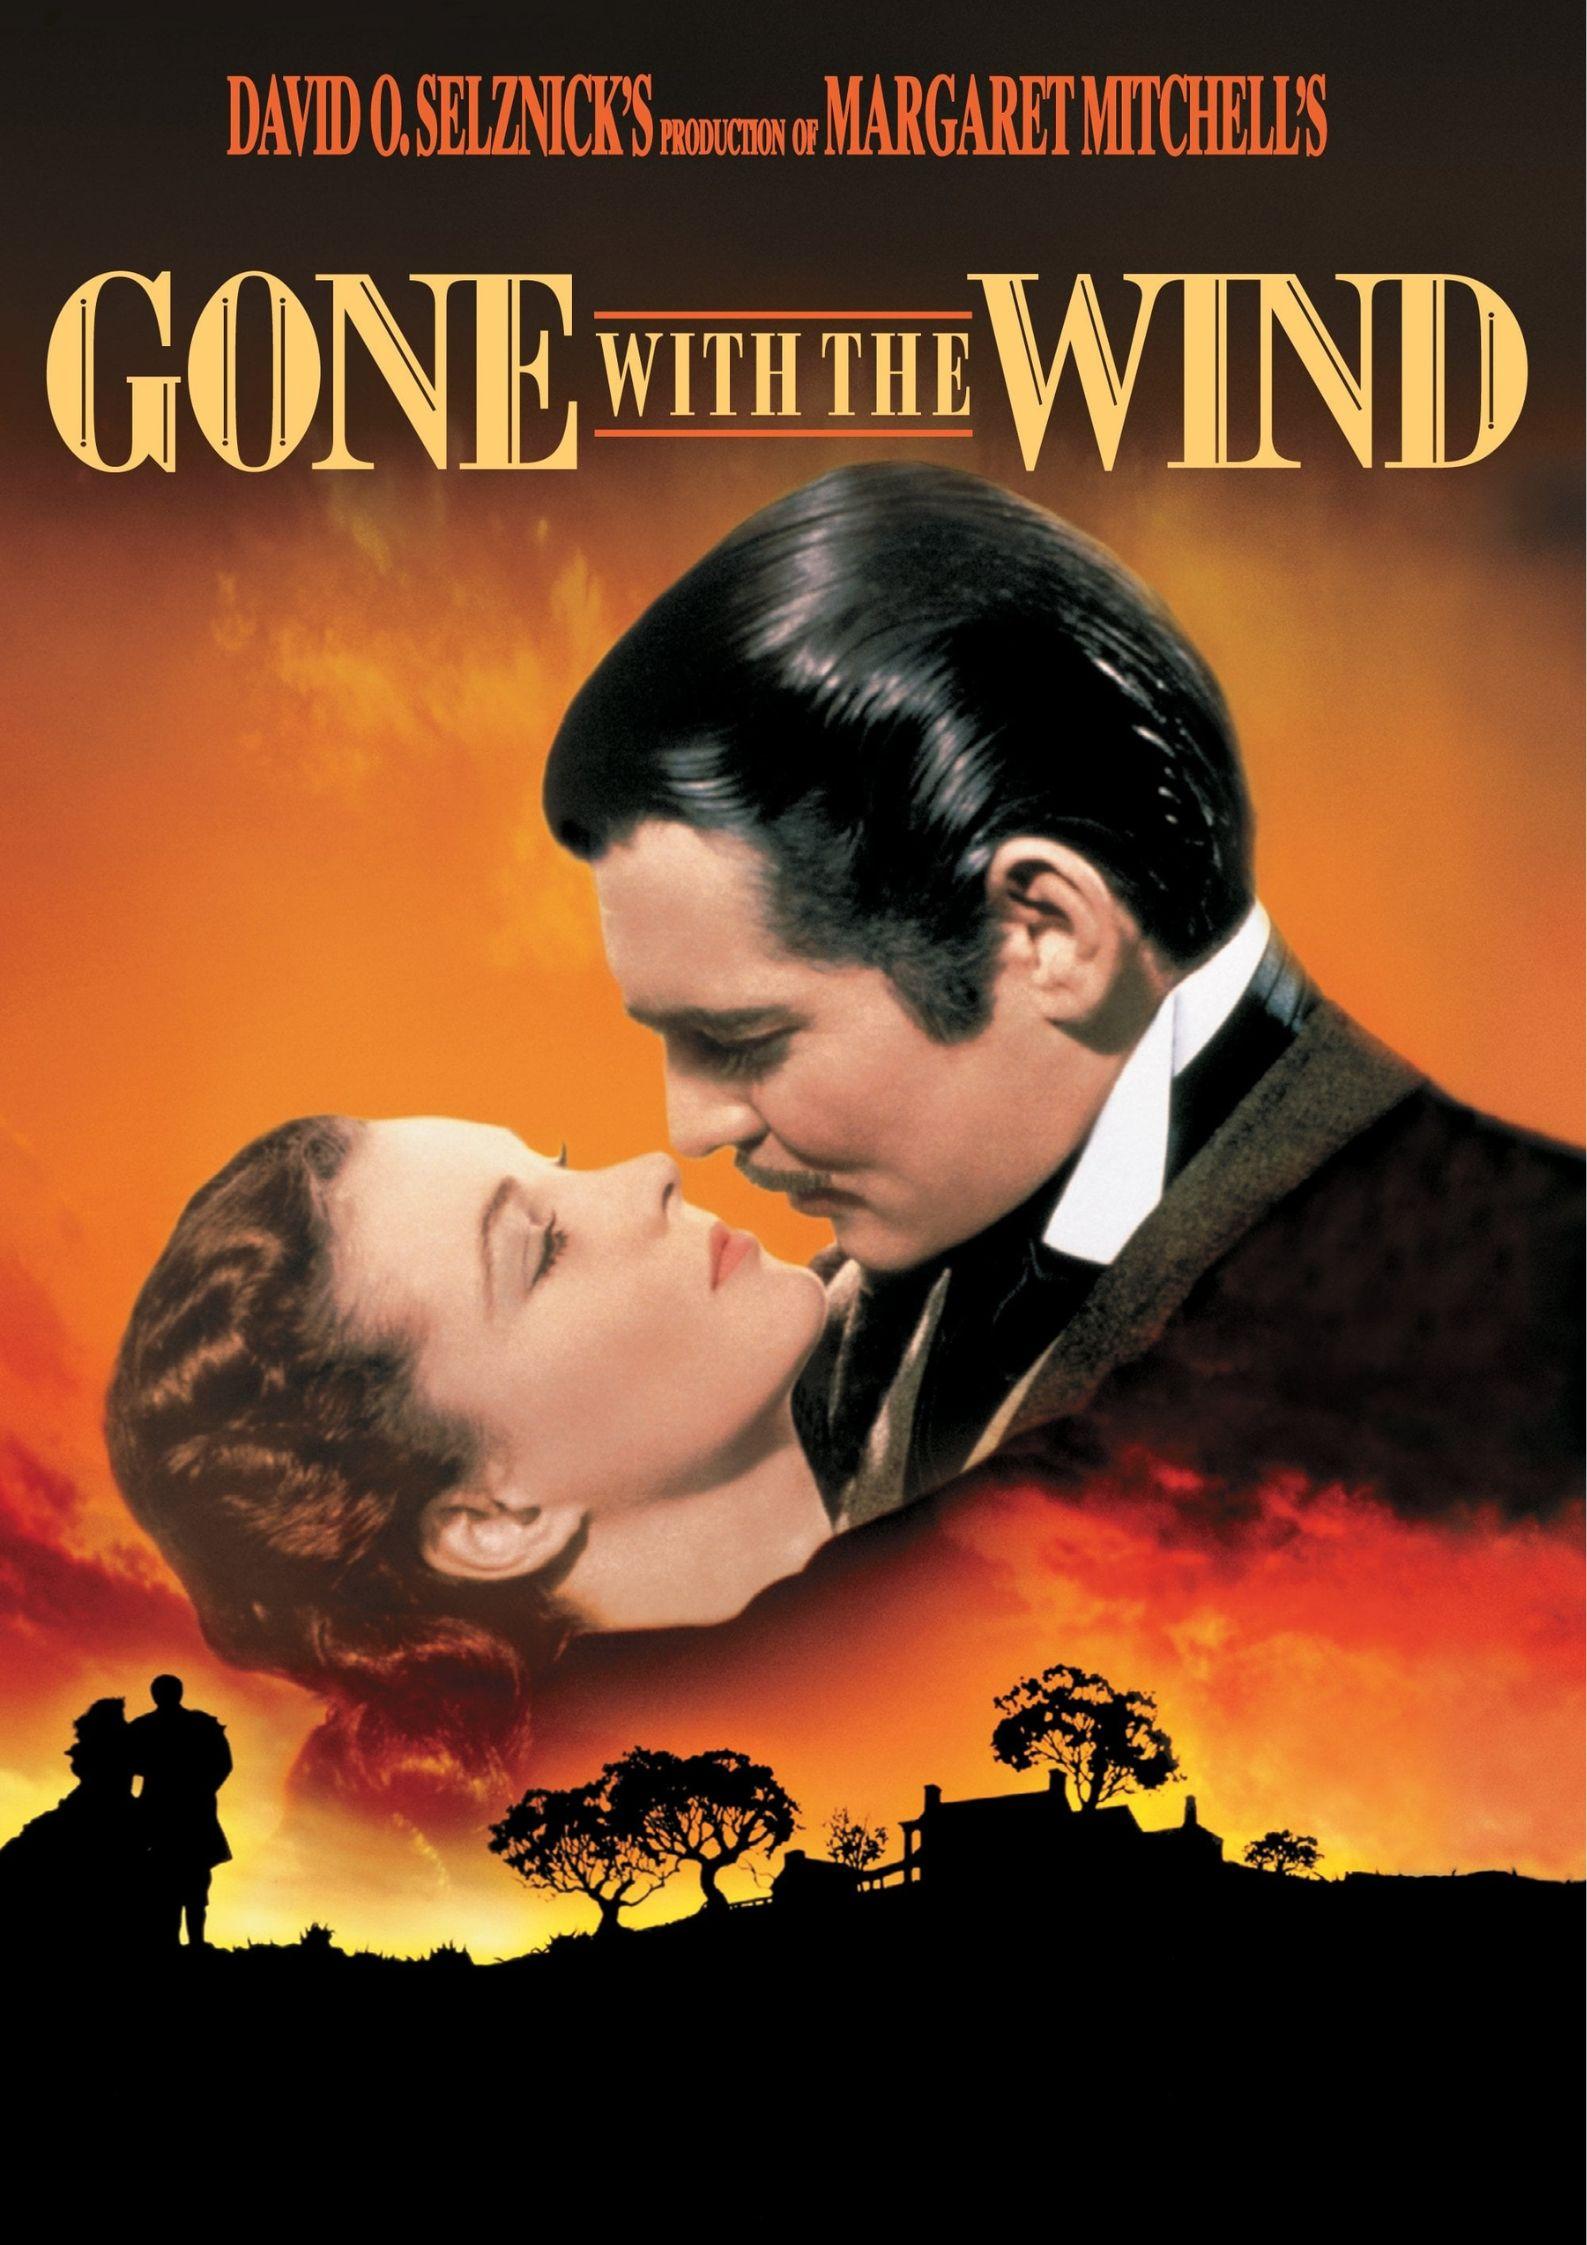 Poster phim Gone with the wind (ảnh: internet)